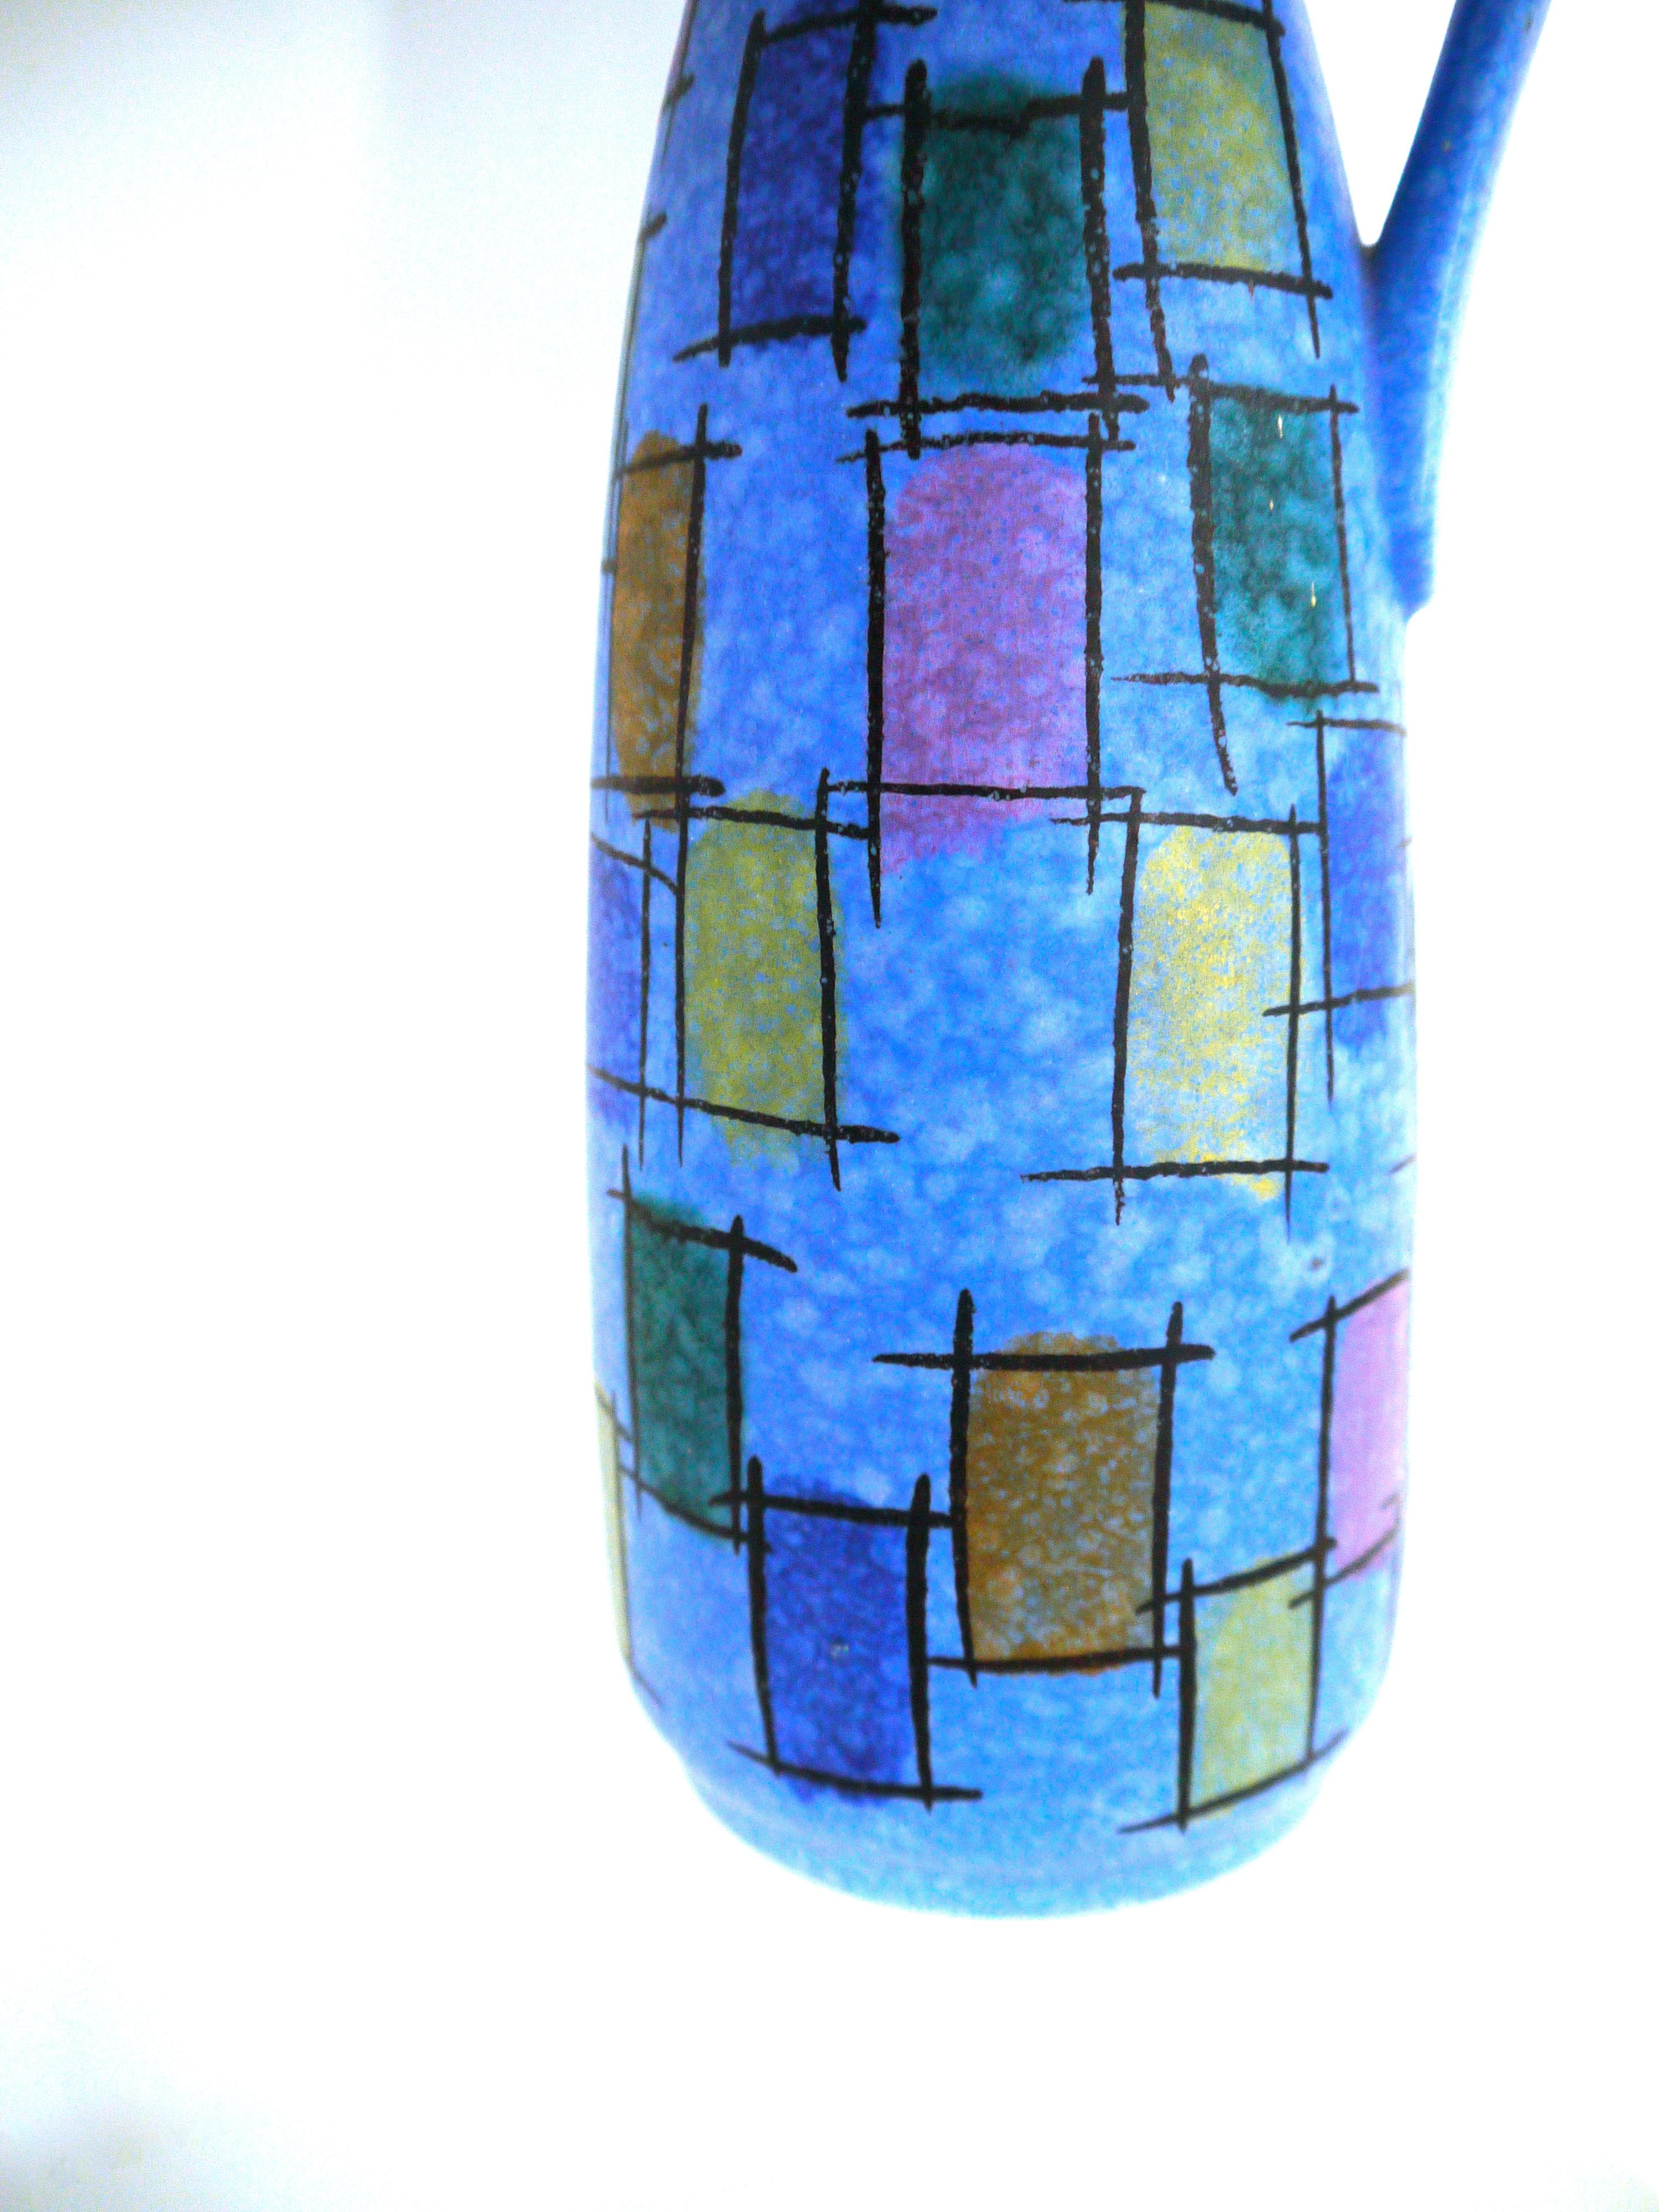 West German modernist ceramic pitcher Jasba Keramik 221/35
Impactful lapis blue color way with multi-color stencil design.

Height 35 cms
Width at widest point approximately 10 cms diameter 6 cms at mouth.

Jasba Keramik was formed in 1926 and